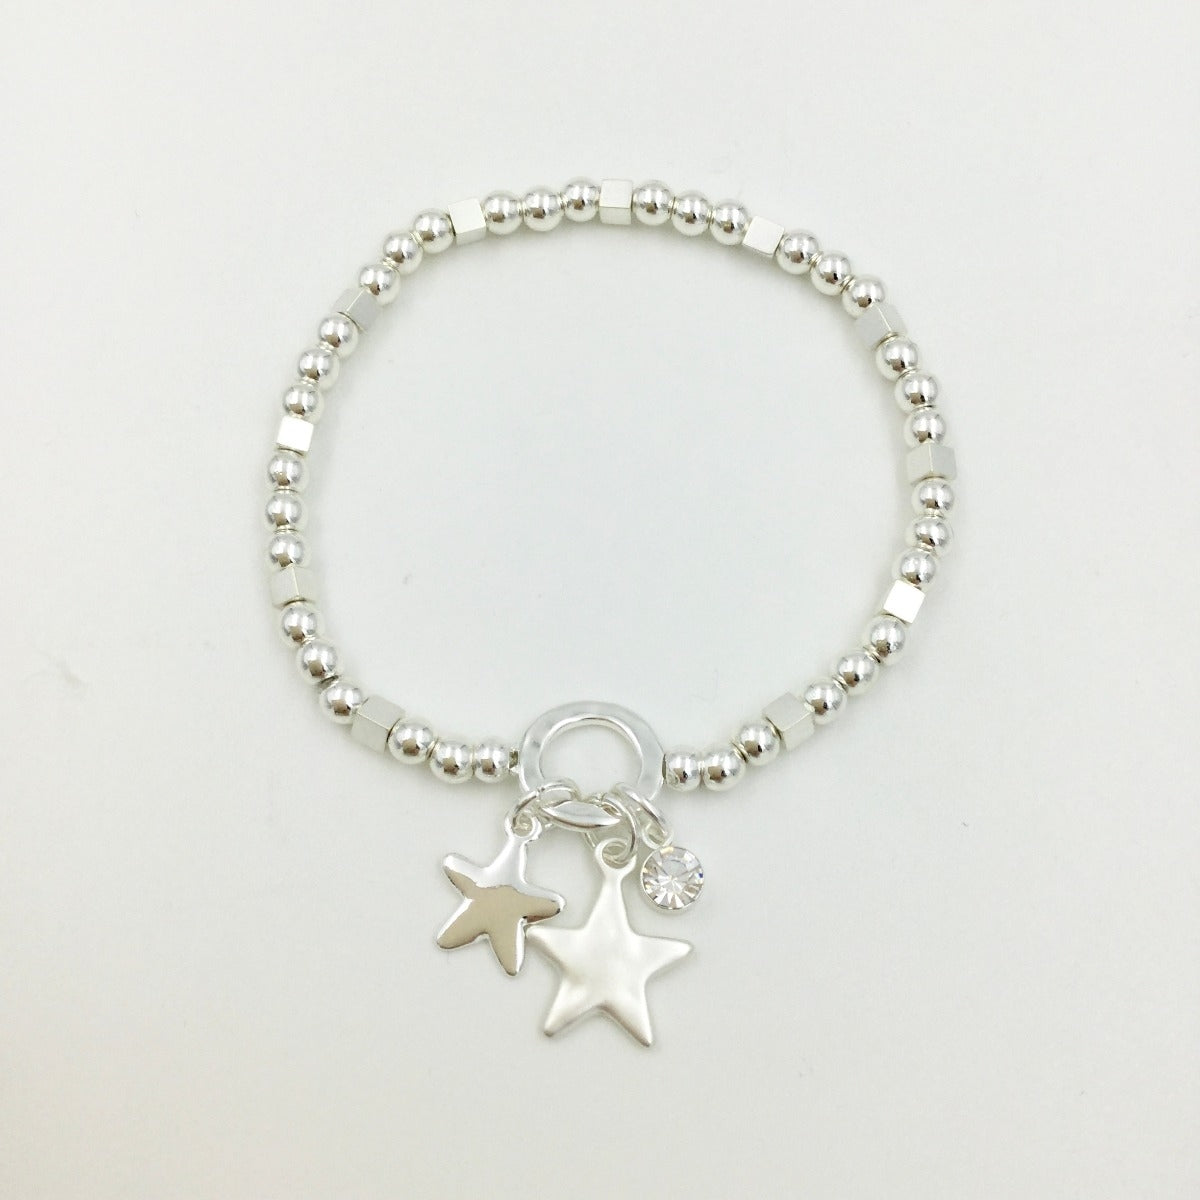 Elasticated Bracelet with Stars Charms and Diamond Bead